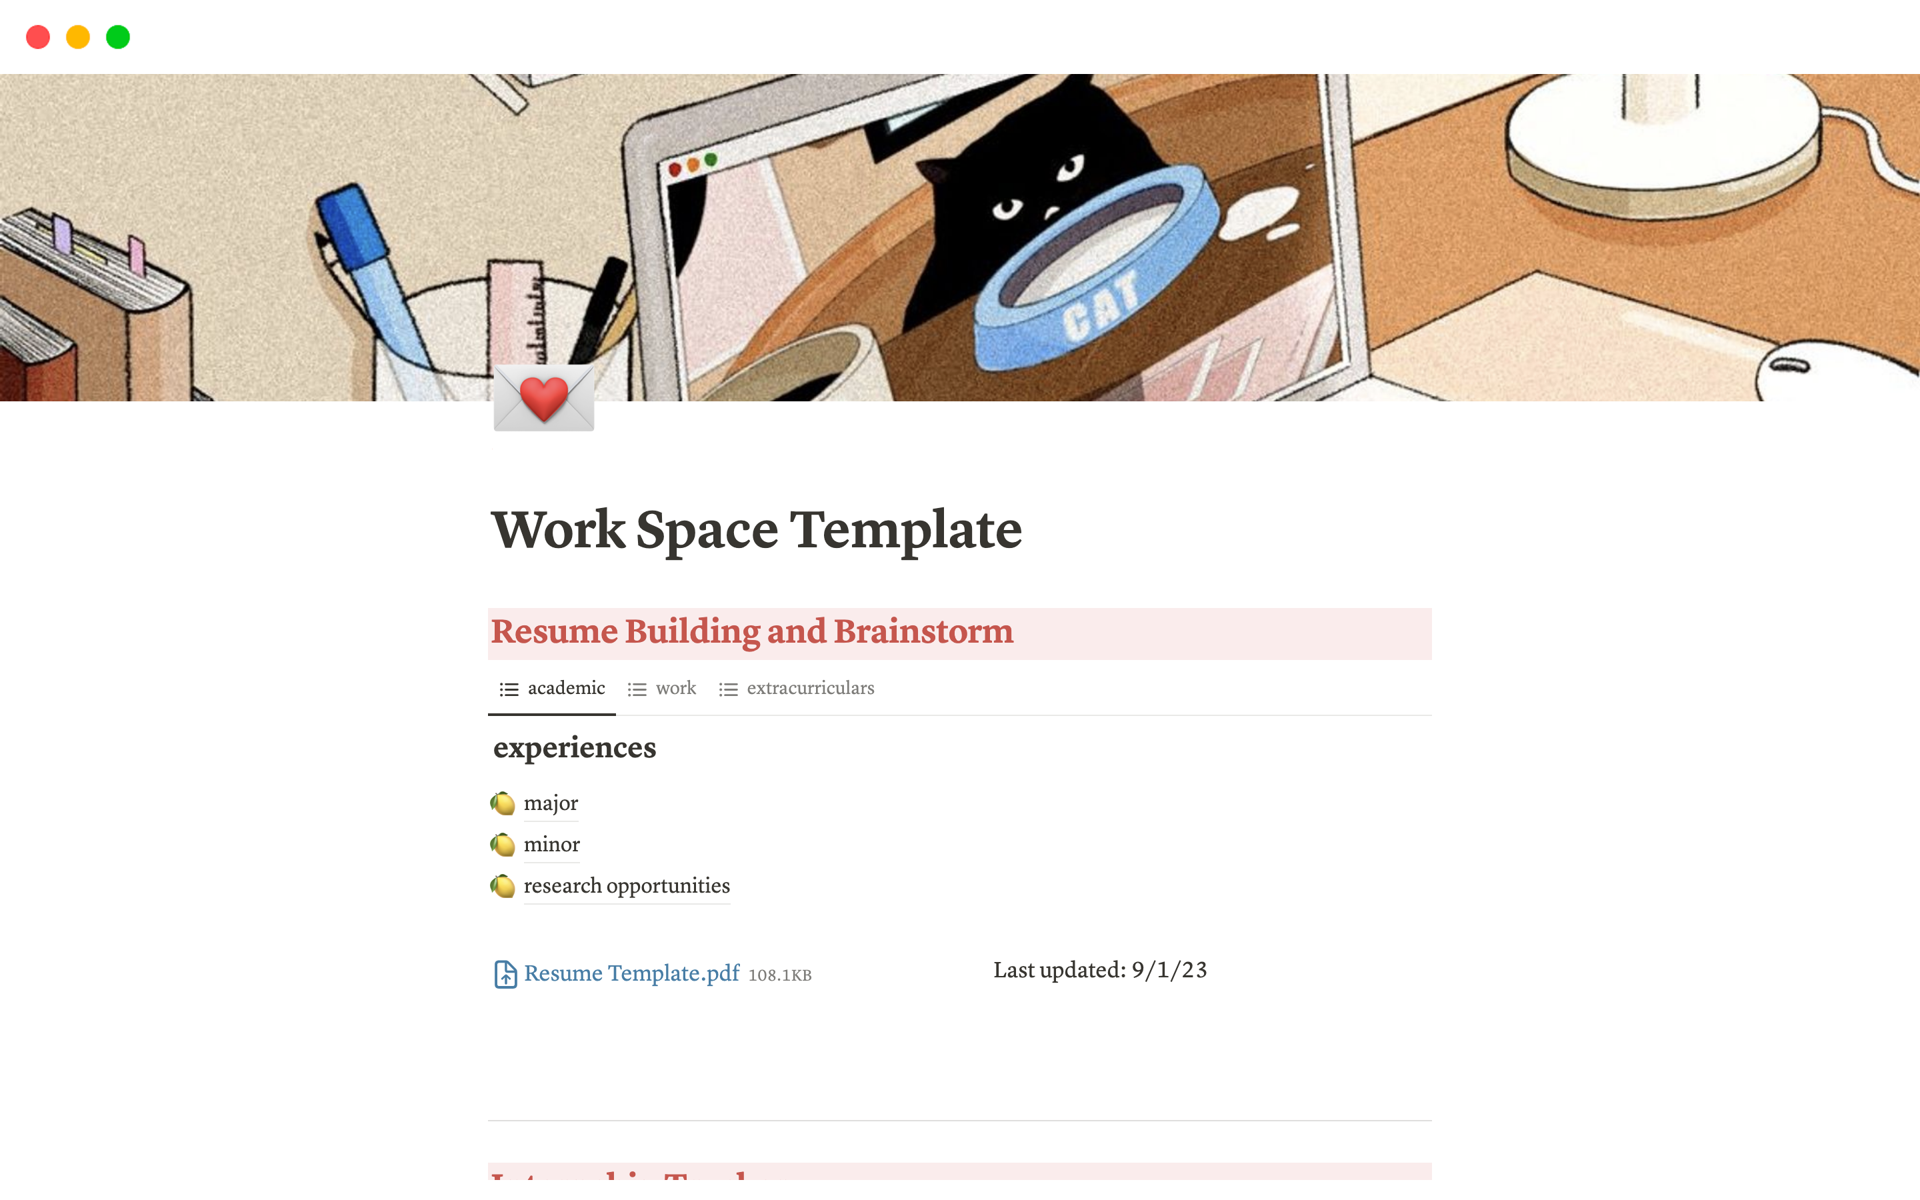 A template preview for Work Space